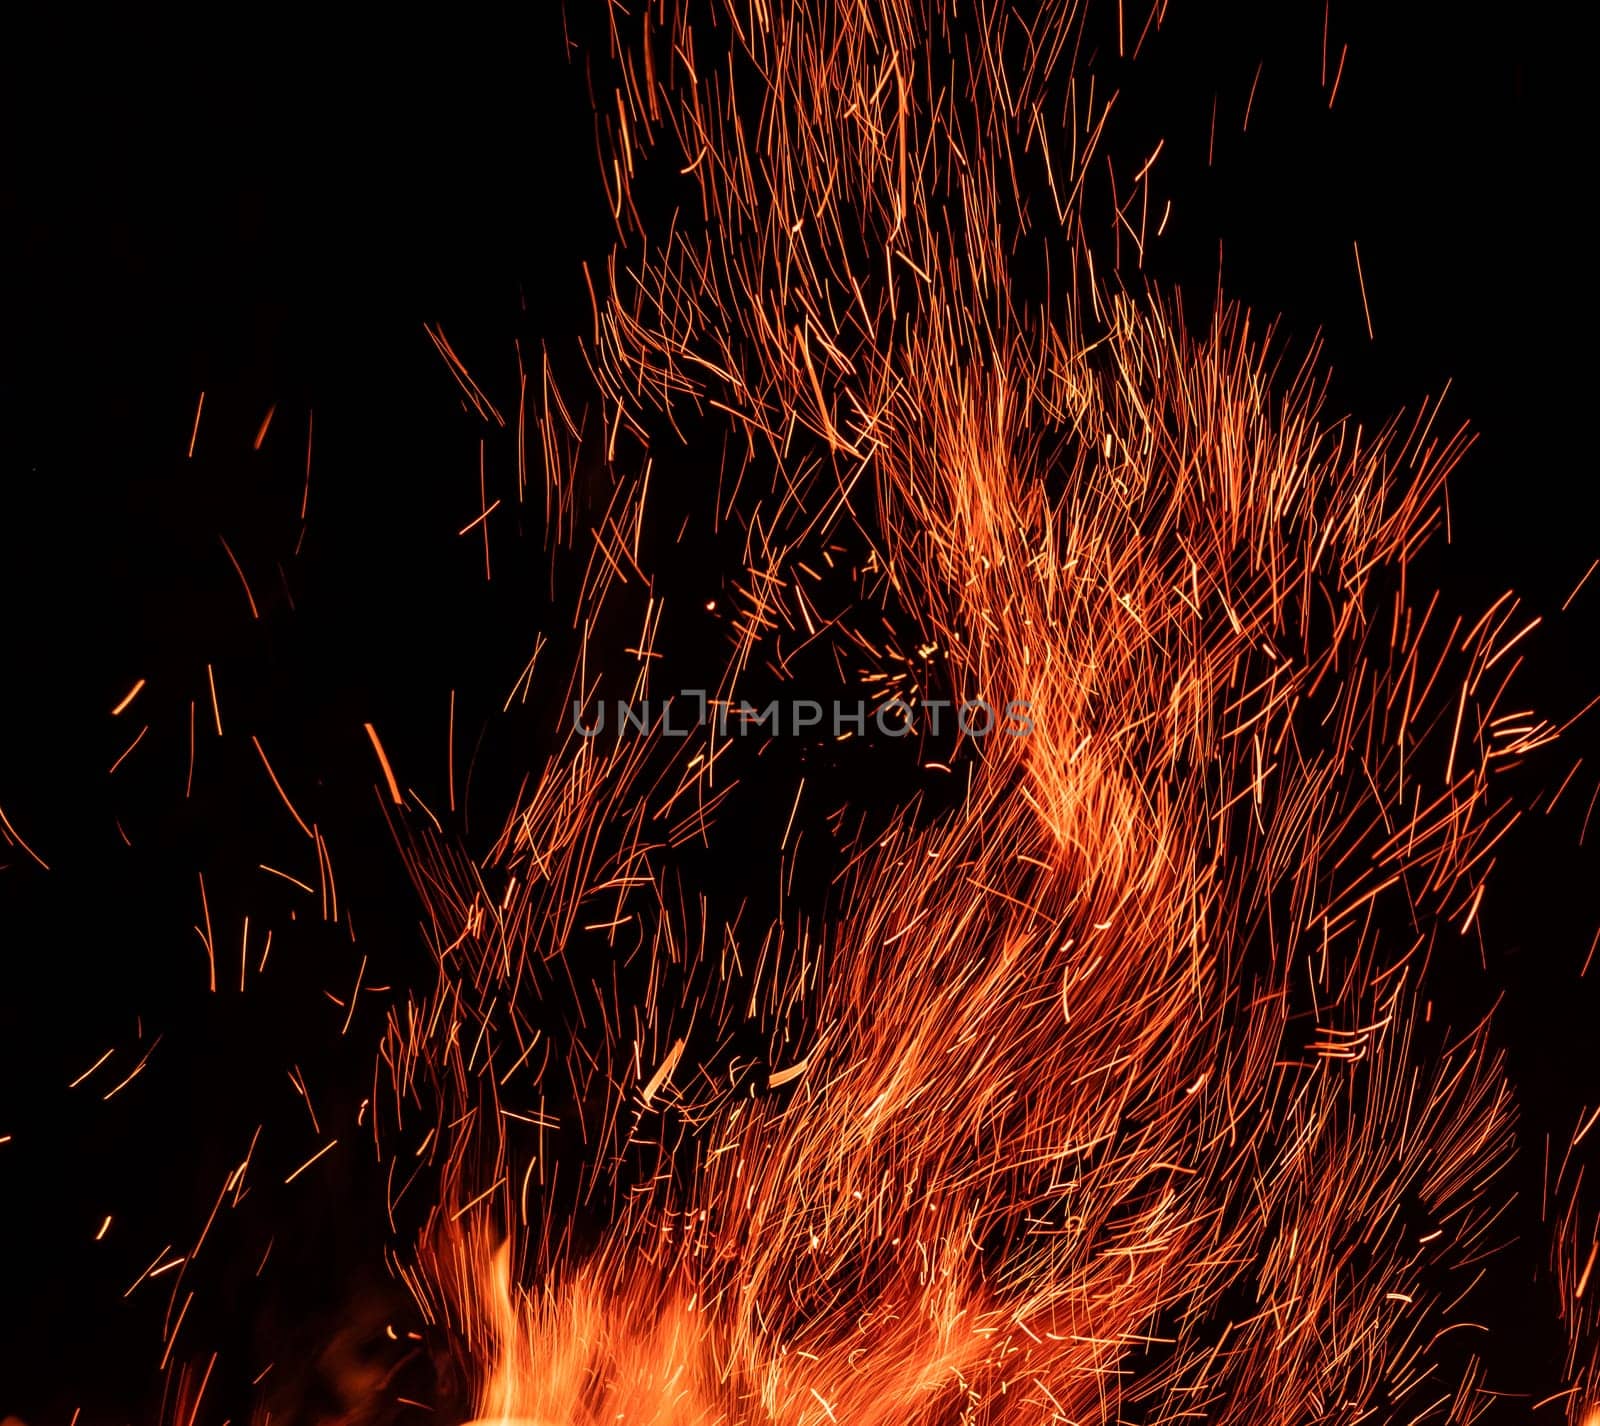 Scattering of sparks from fire on black background